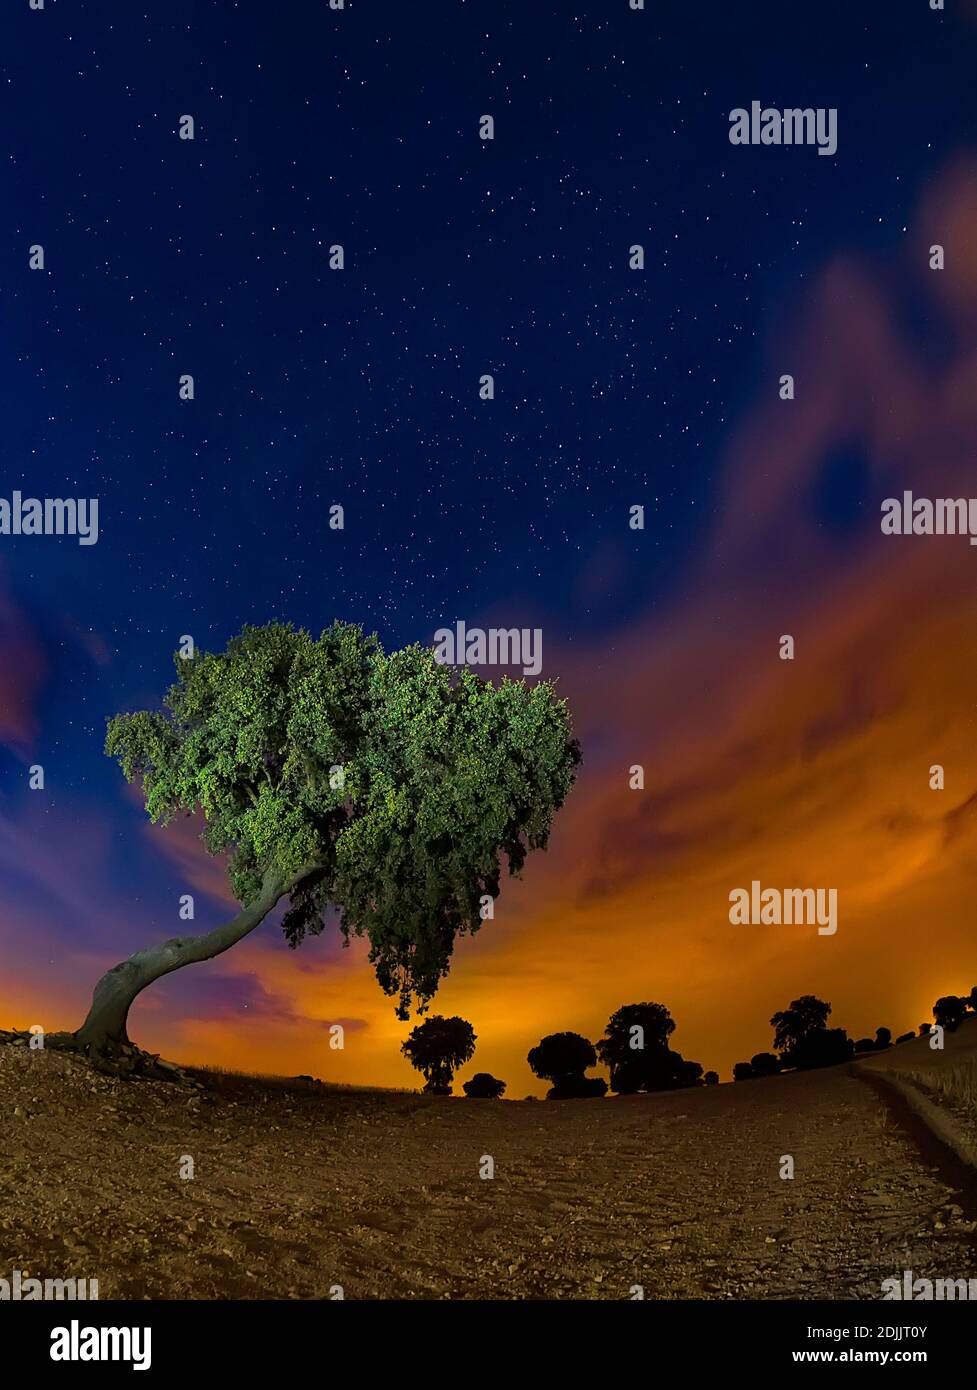 Holm oak in a field of cultivation. Illuminated with cold flashlight the tree and warm flashlight in ground. Stock Photo